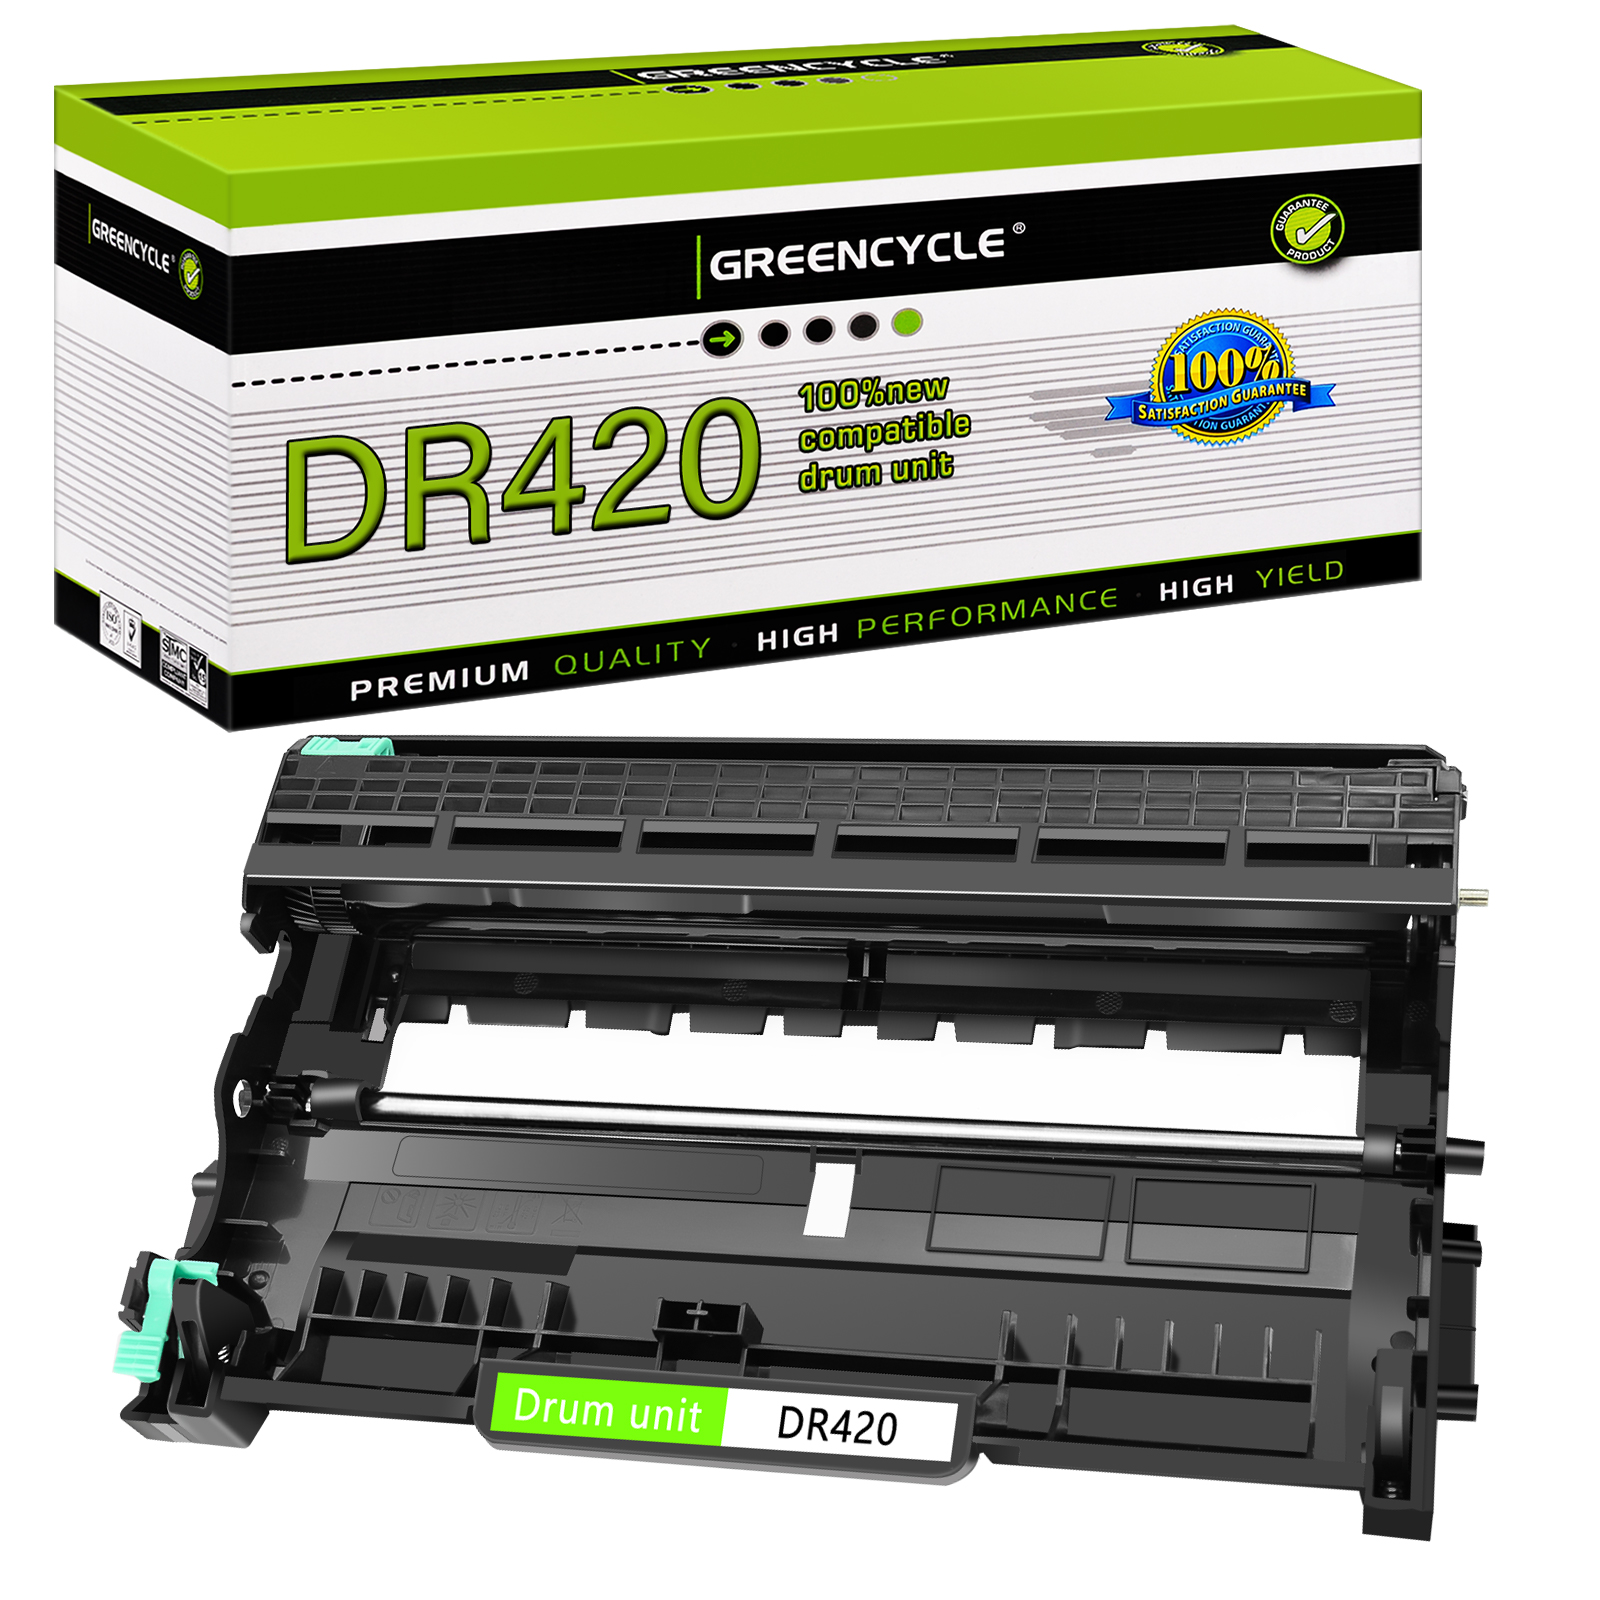 GREENCYCLE Compatible for Brother DR420 Drum Unit work for HL-2270DW HL-2240 MFC-7240 intellifax-2840 DCP-7065DN Printer - image 1 of 9